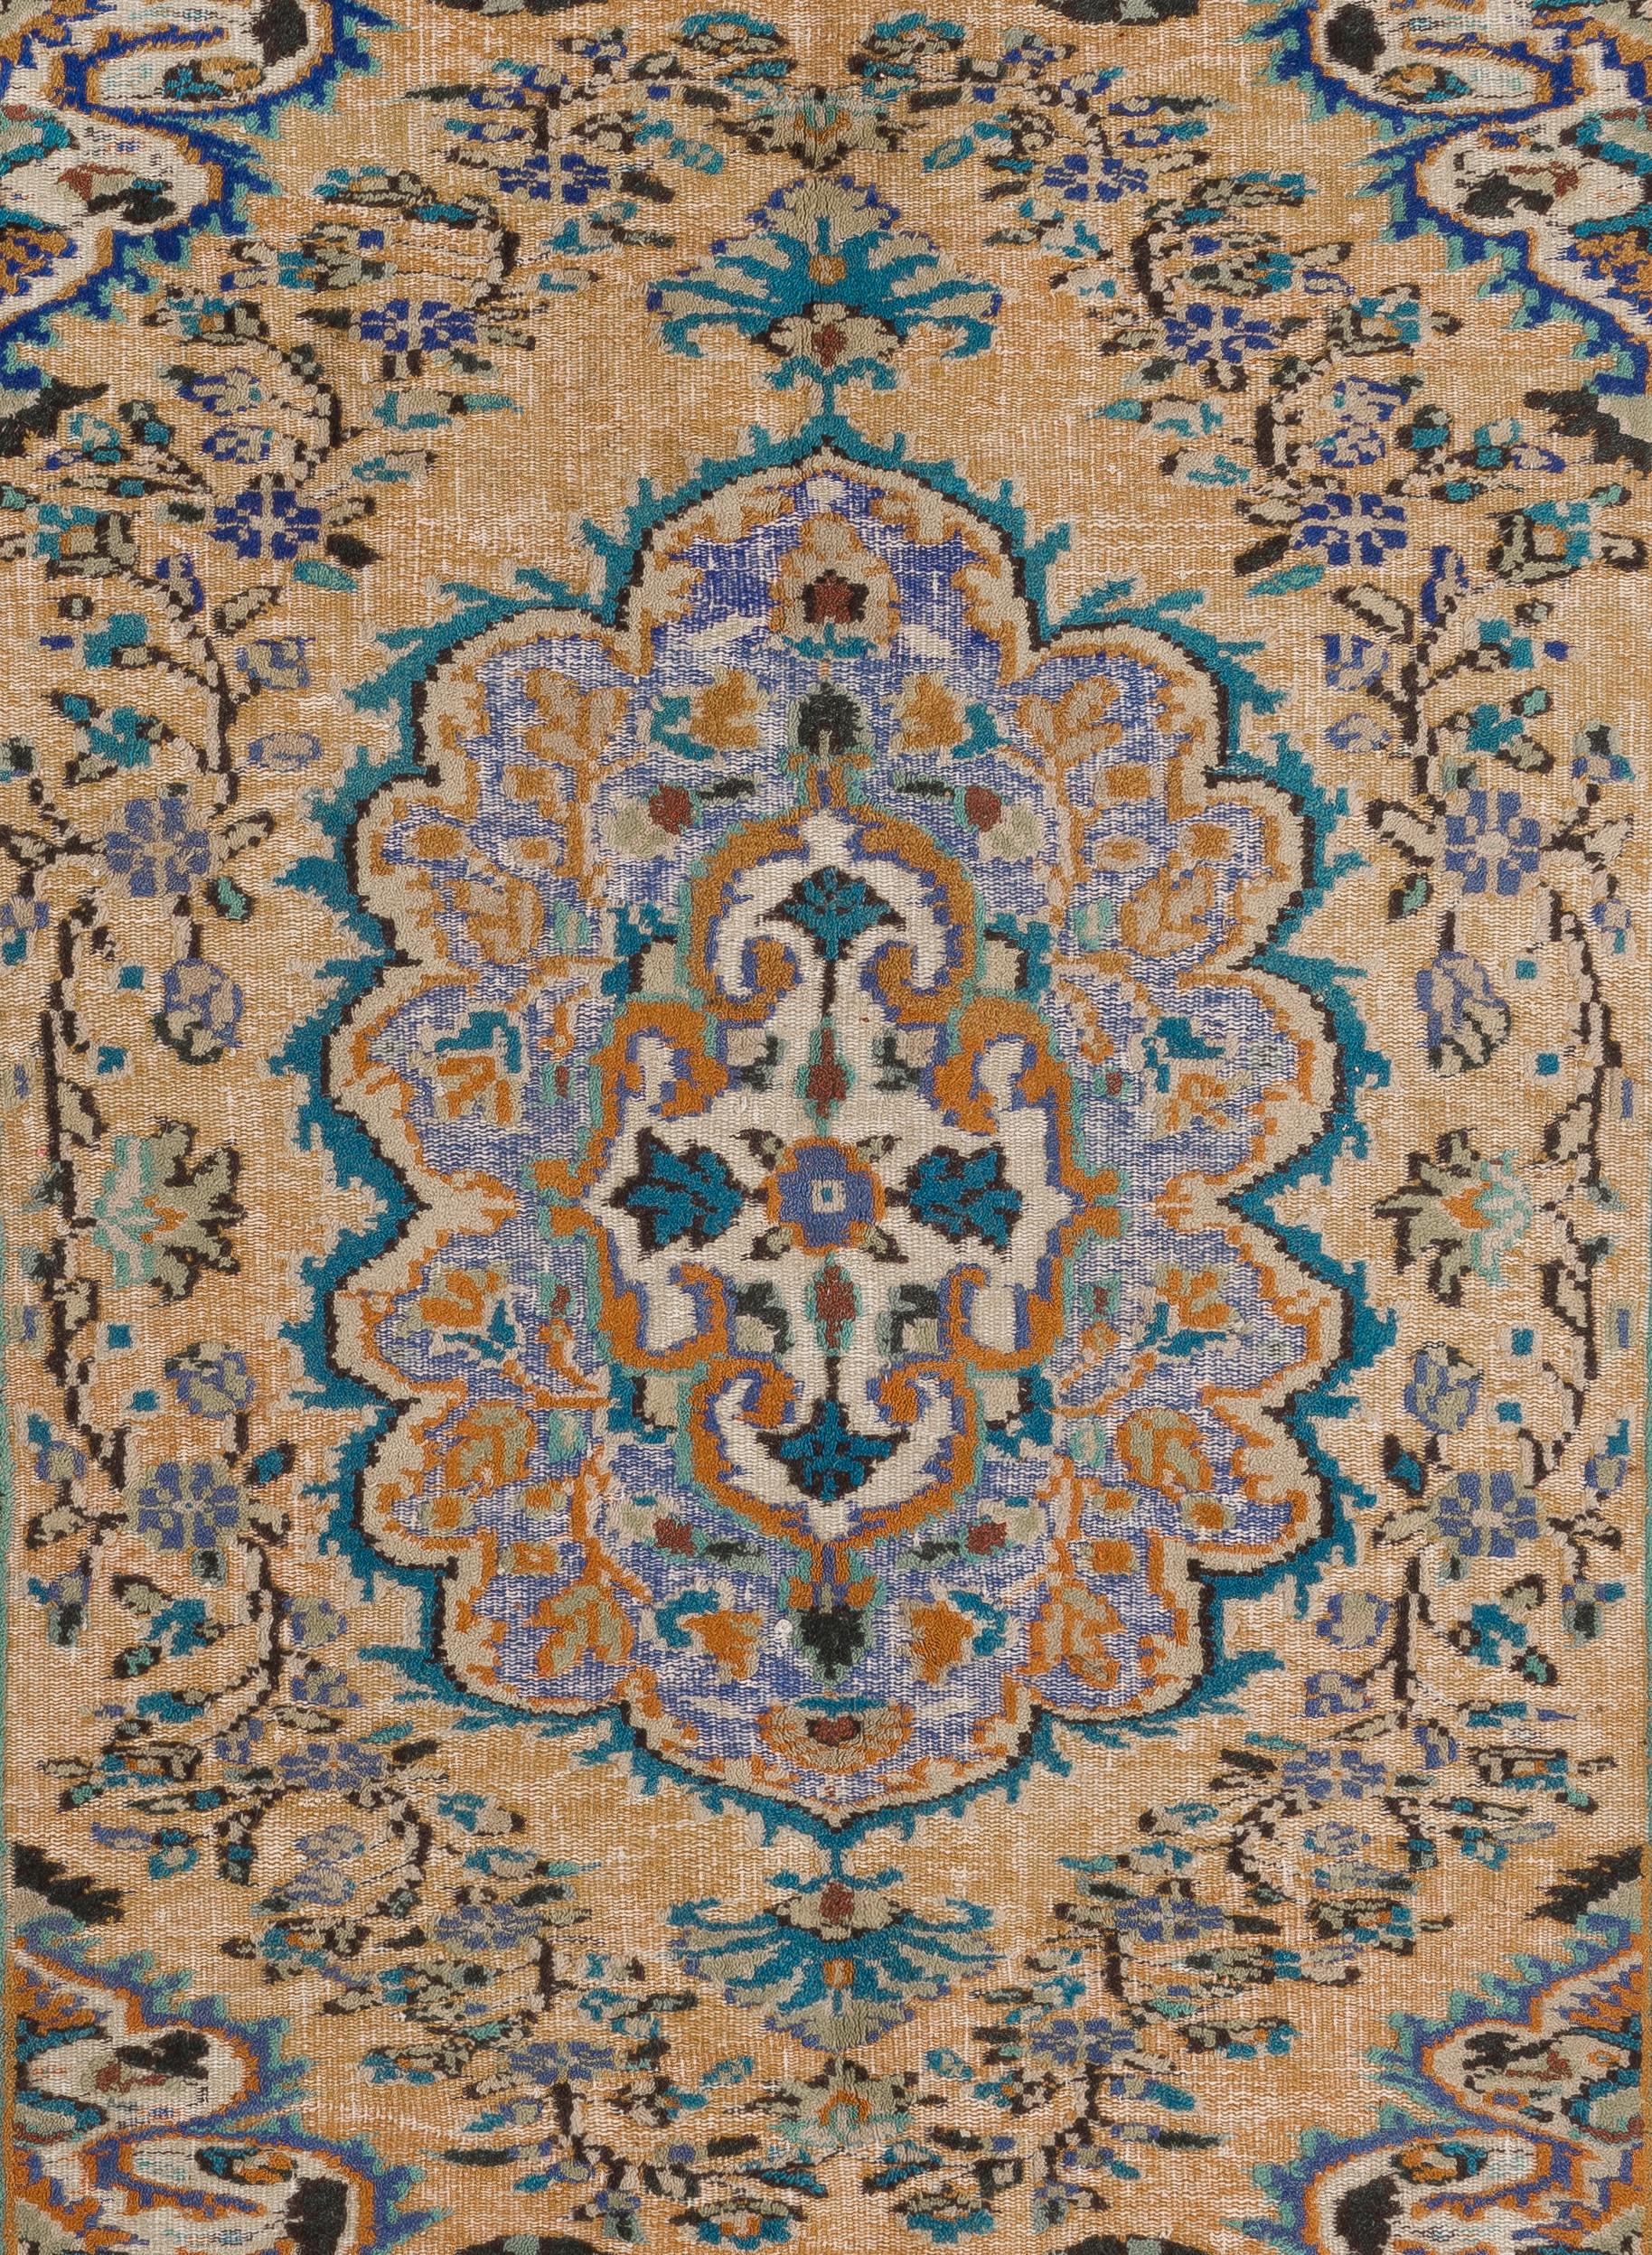 A vintage hand knotted Turkish rug from the 1960s featuring a round polygonal medallion filled with floral motifs. The medallion is surrounded all around with an abundance of flowering vines drawn in detail, conveying a sense of smooth, delicate